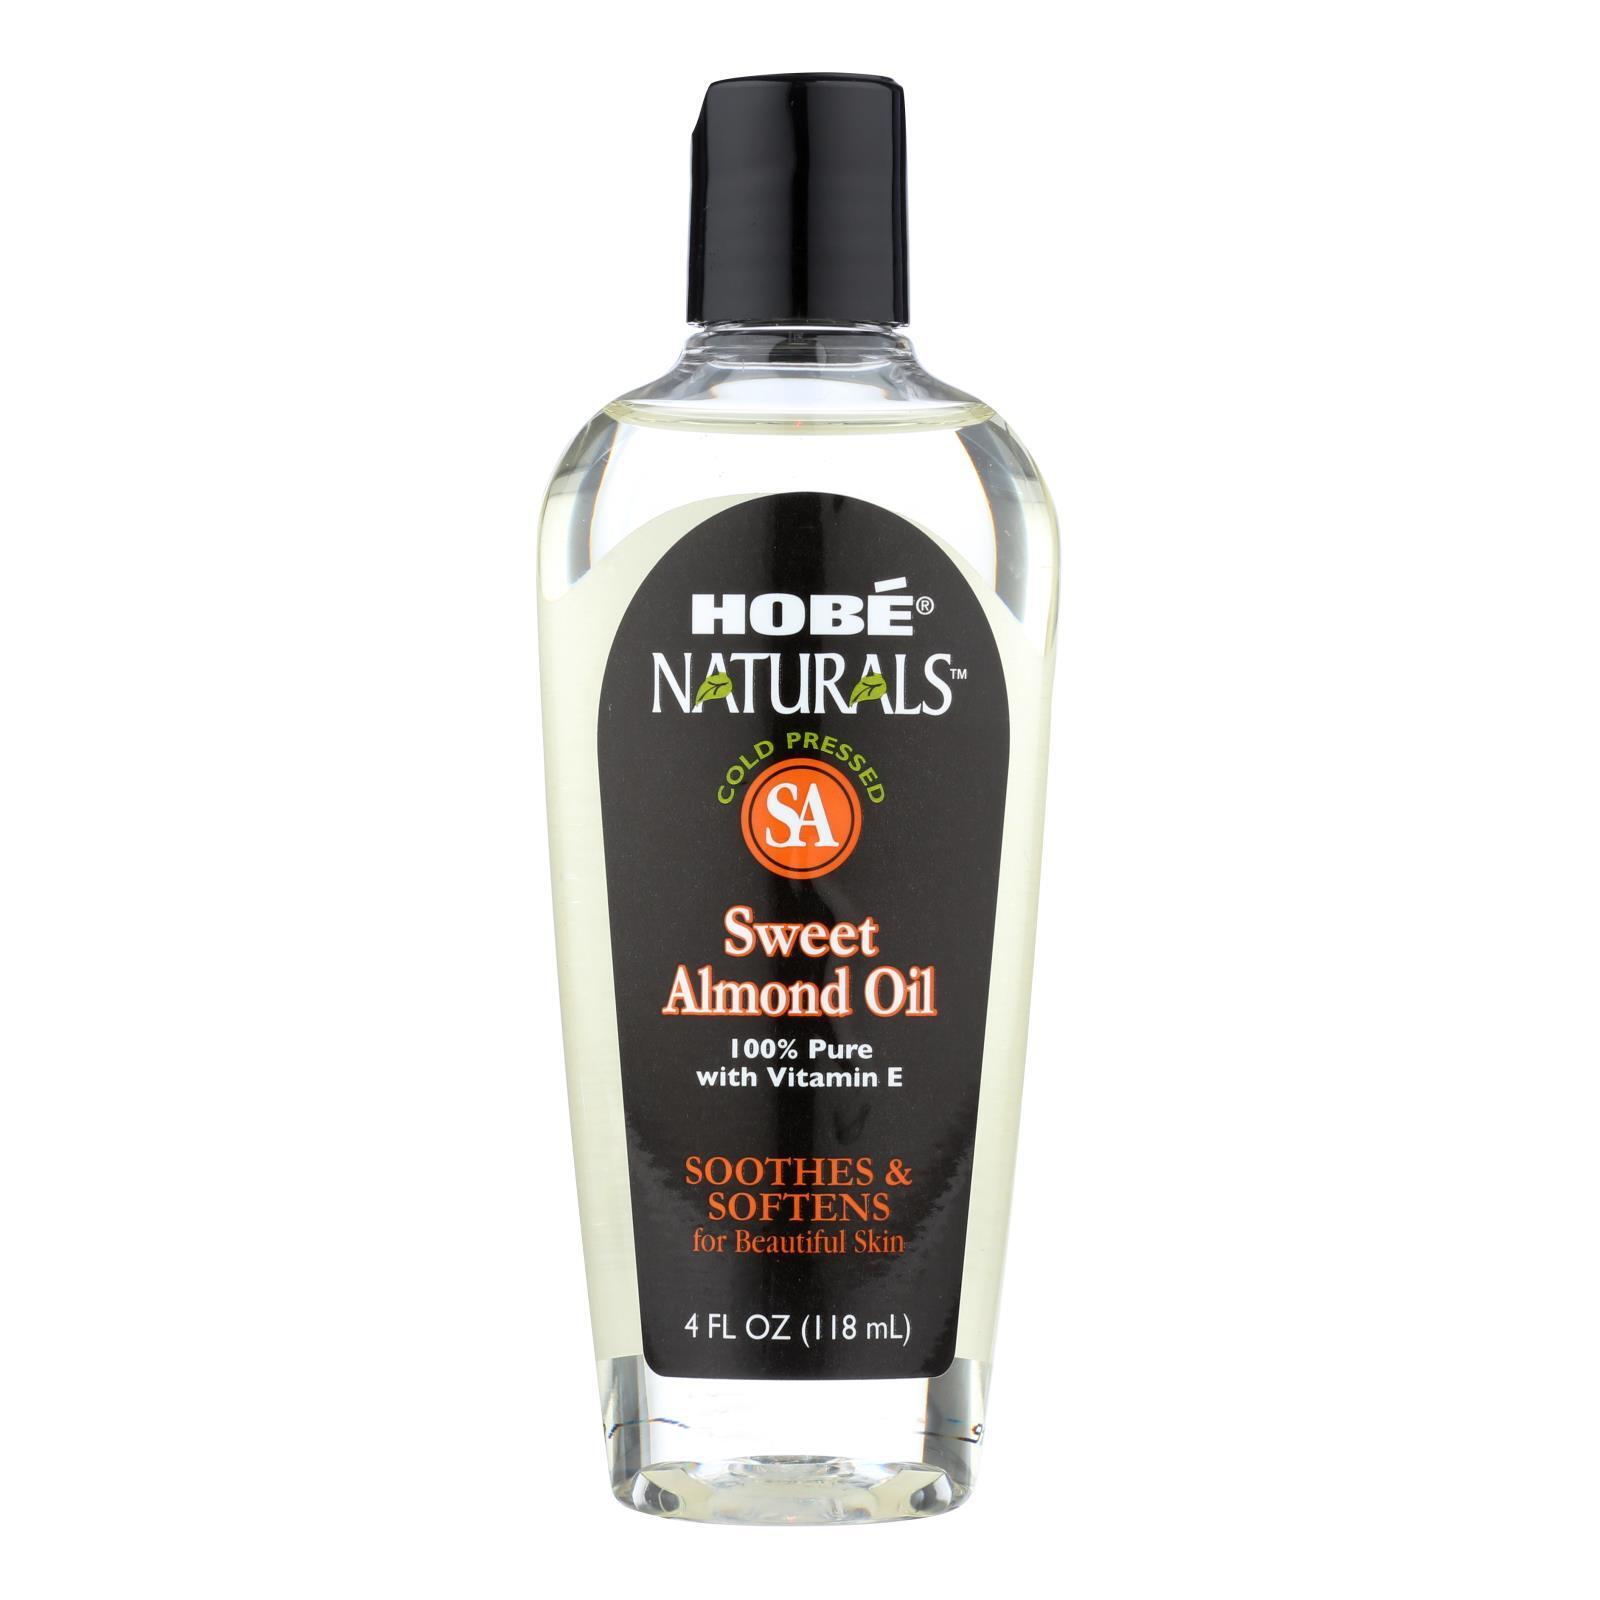 Primary image for Hobe Labs Hobe Naturals Sweet Almond Oil - 4 fl oz